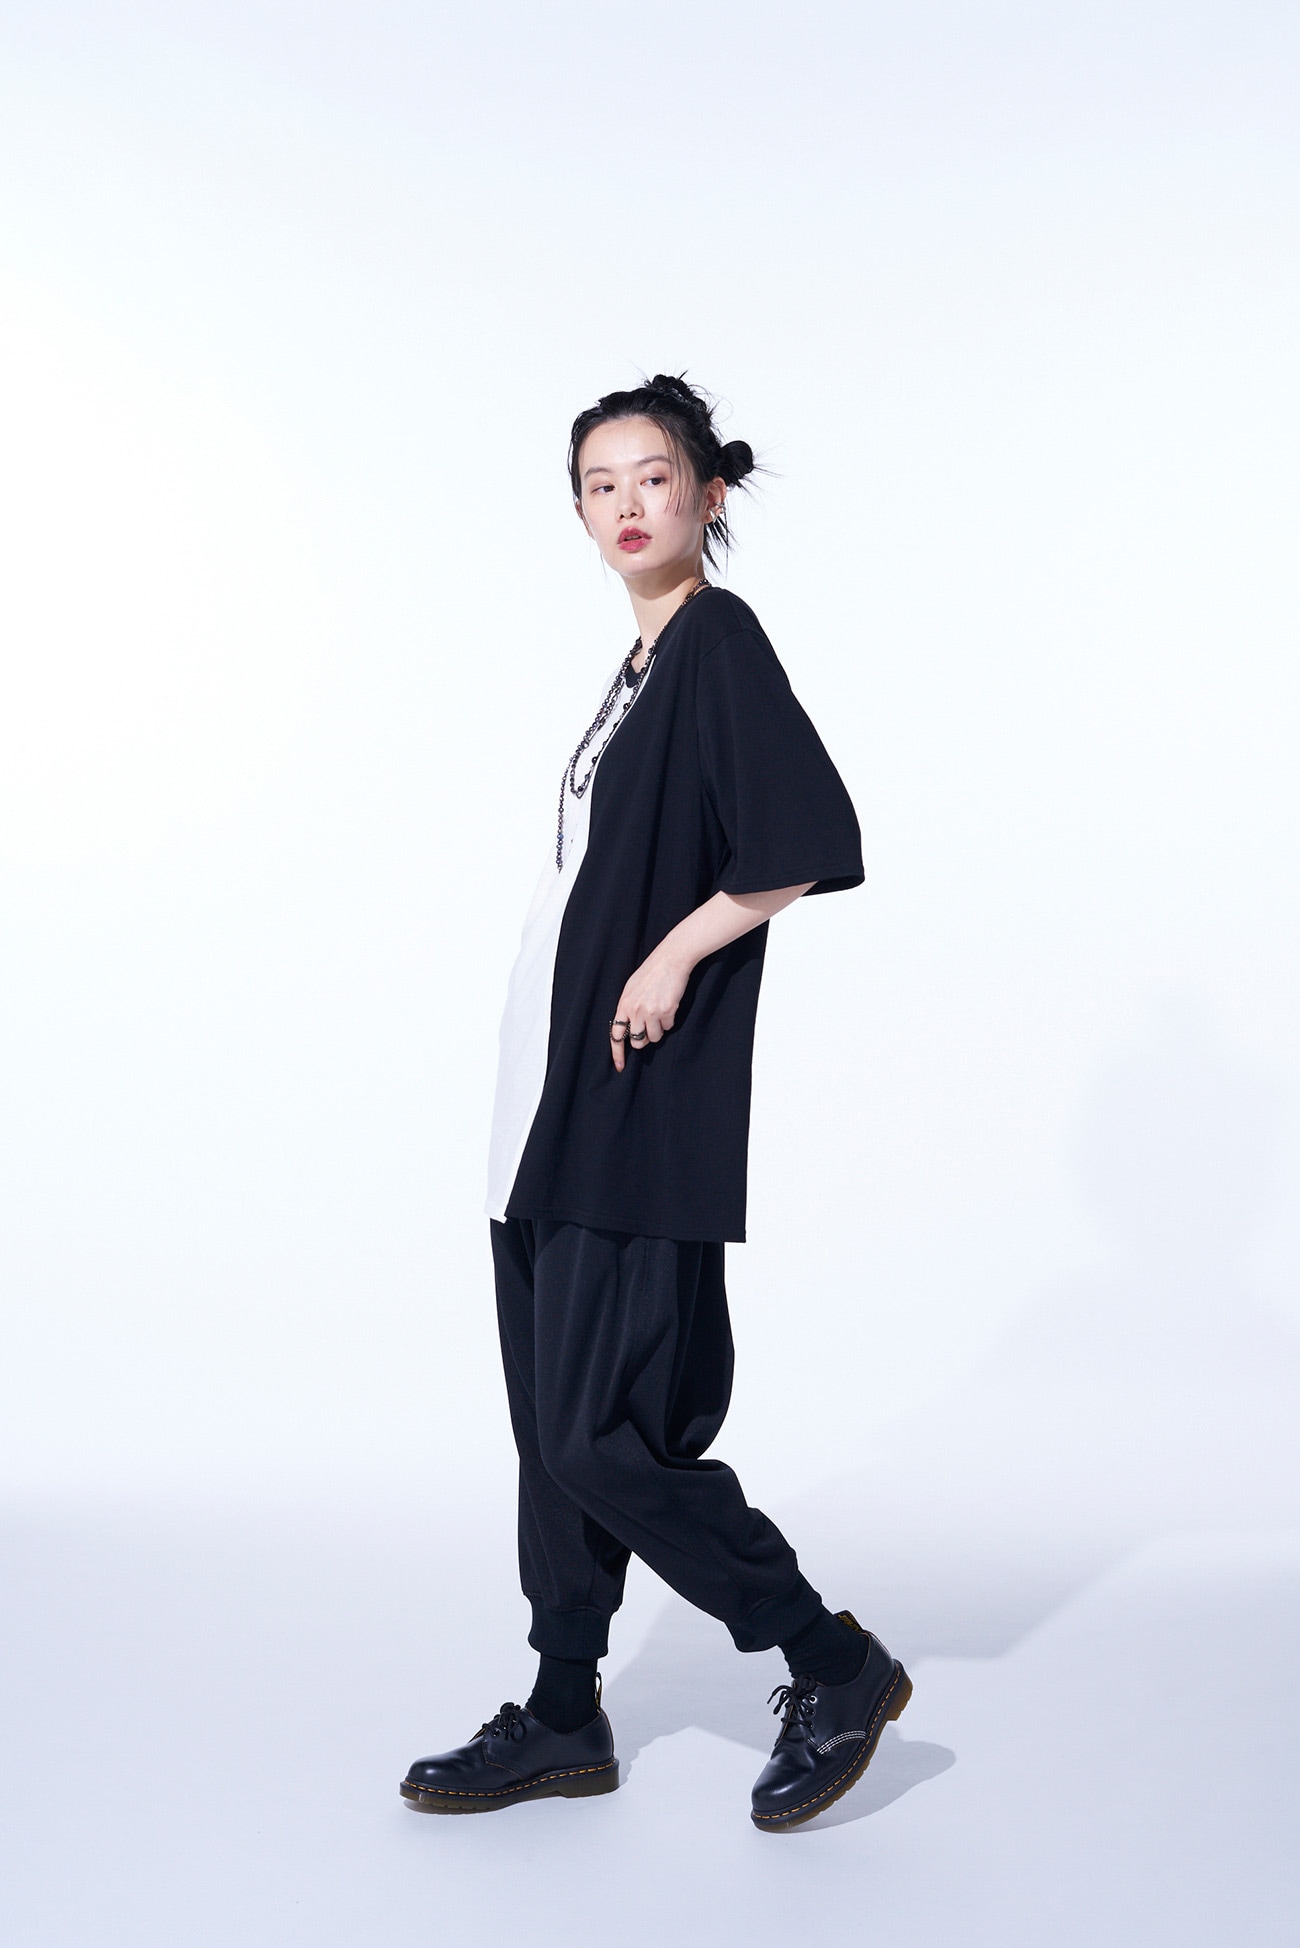 POLYESTER SMOOTH JERSEY BALLOON SARUEL PANTS WITH RIBBED HEMS